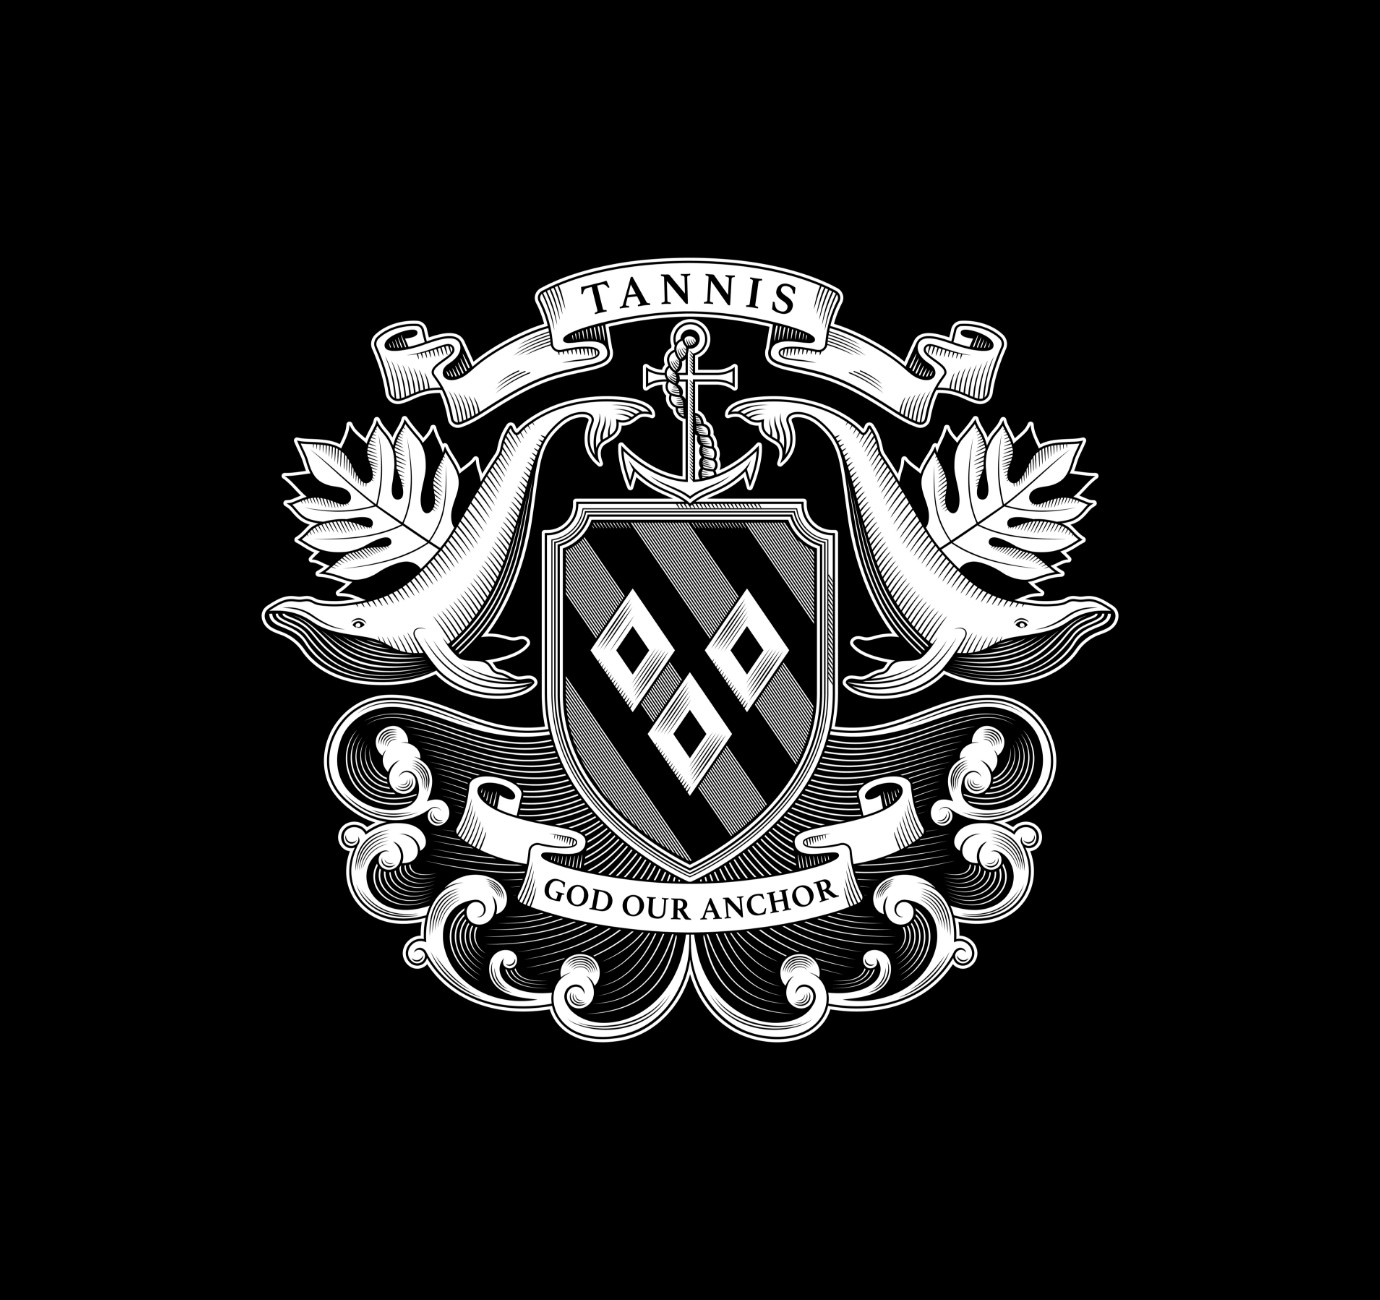 Tannis family crest shield whale design by Root Studio